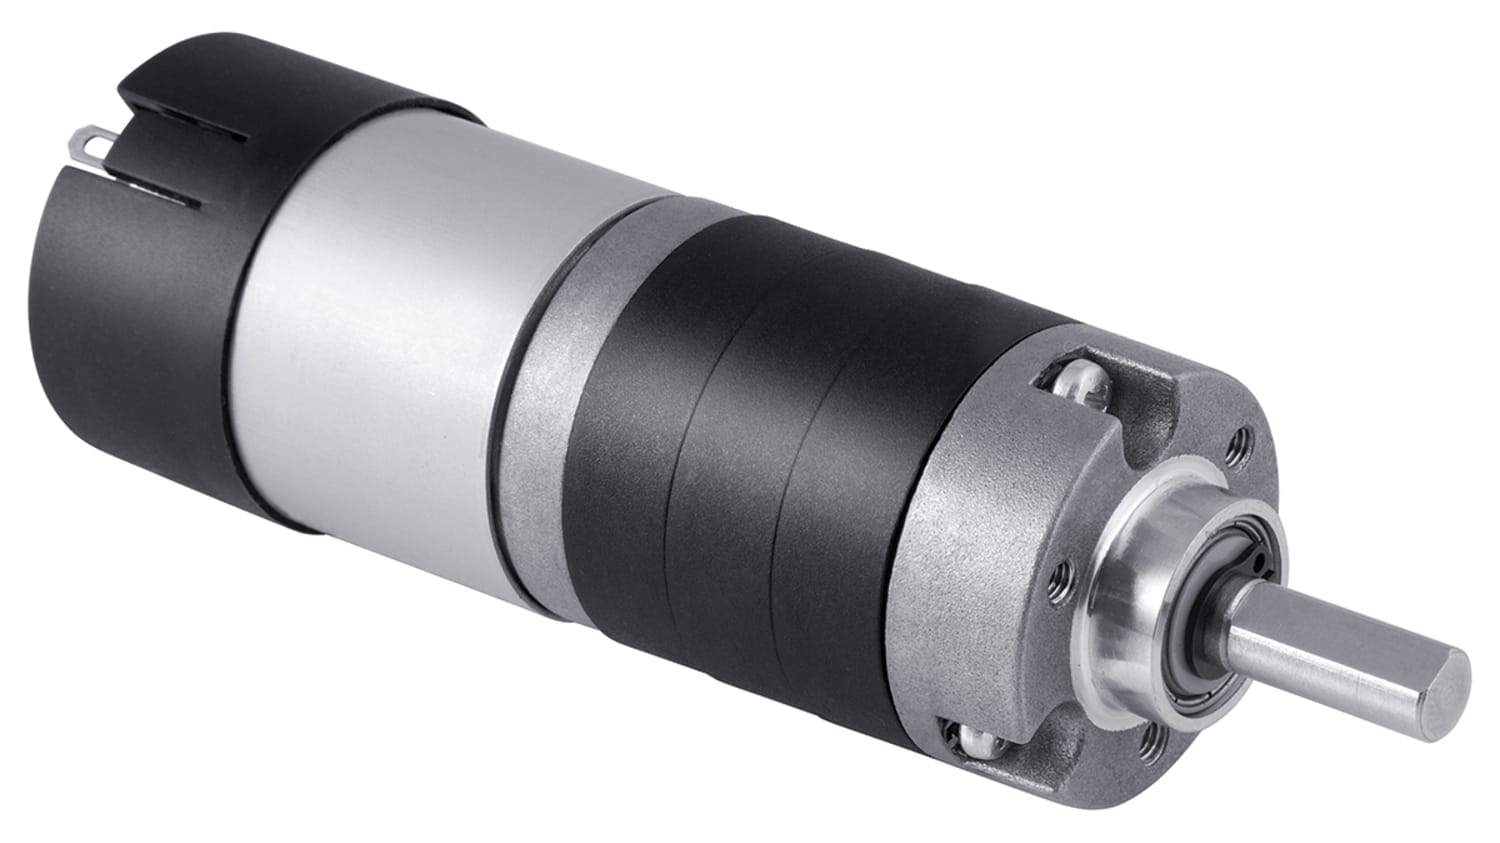 Ps150 24 125 Micromotors Brushed Geared Dc Geared Motor 10 6 W 24 V 1 Nm 34 Rpm 5 5mm Shaft Diameter Rs Components